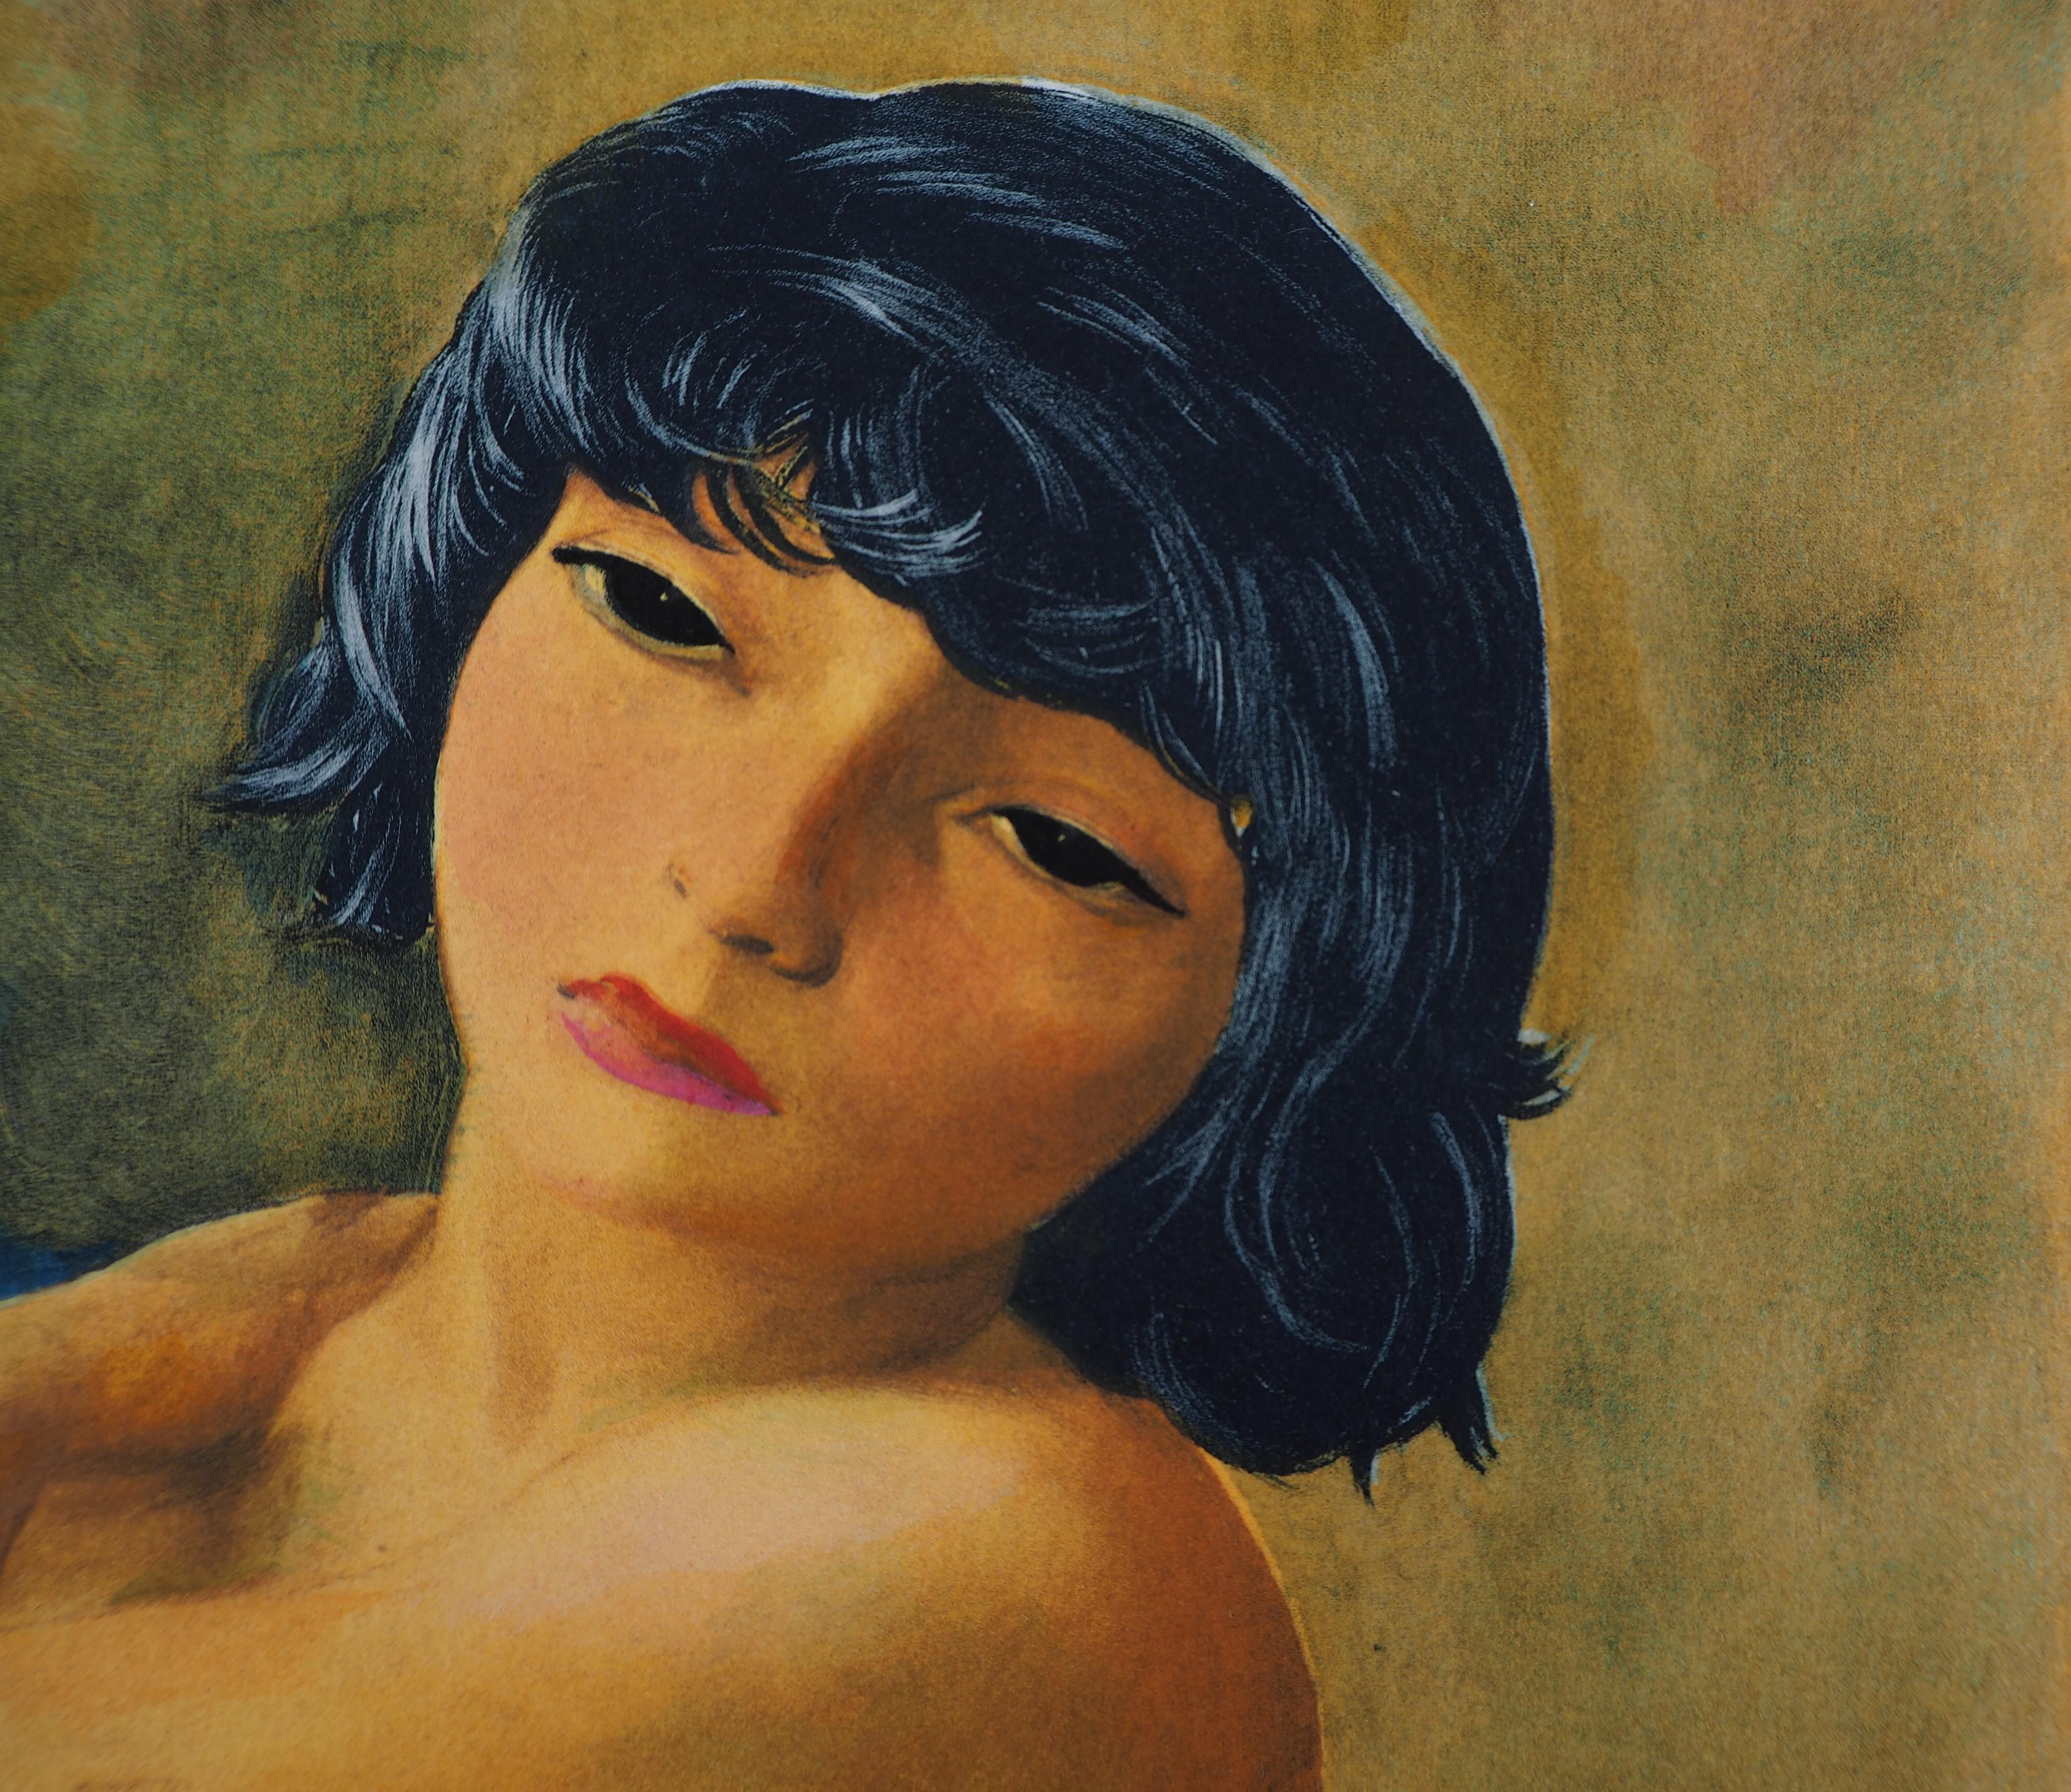 Dreaming Nude - Lithograph - Modern Print by Moise Kisling